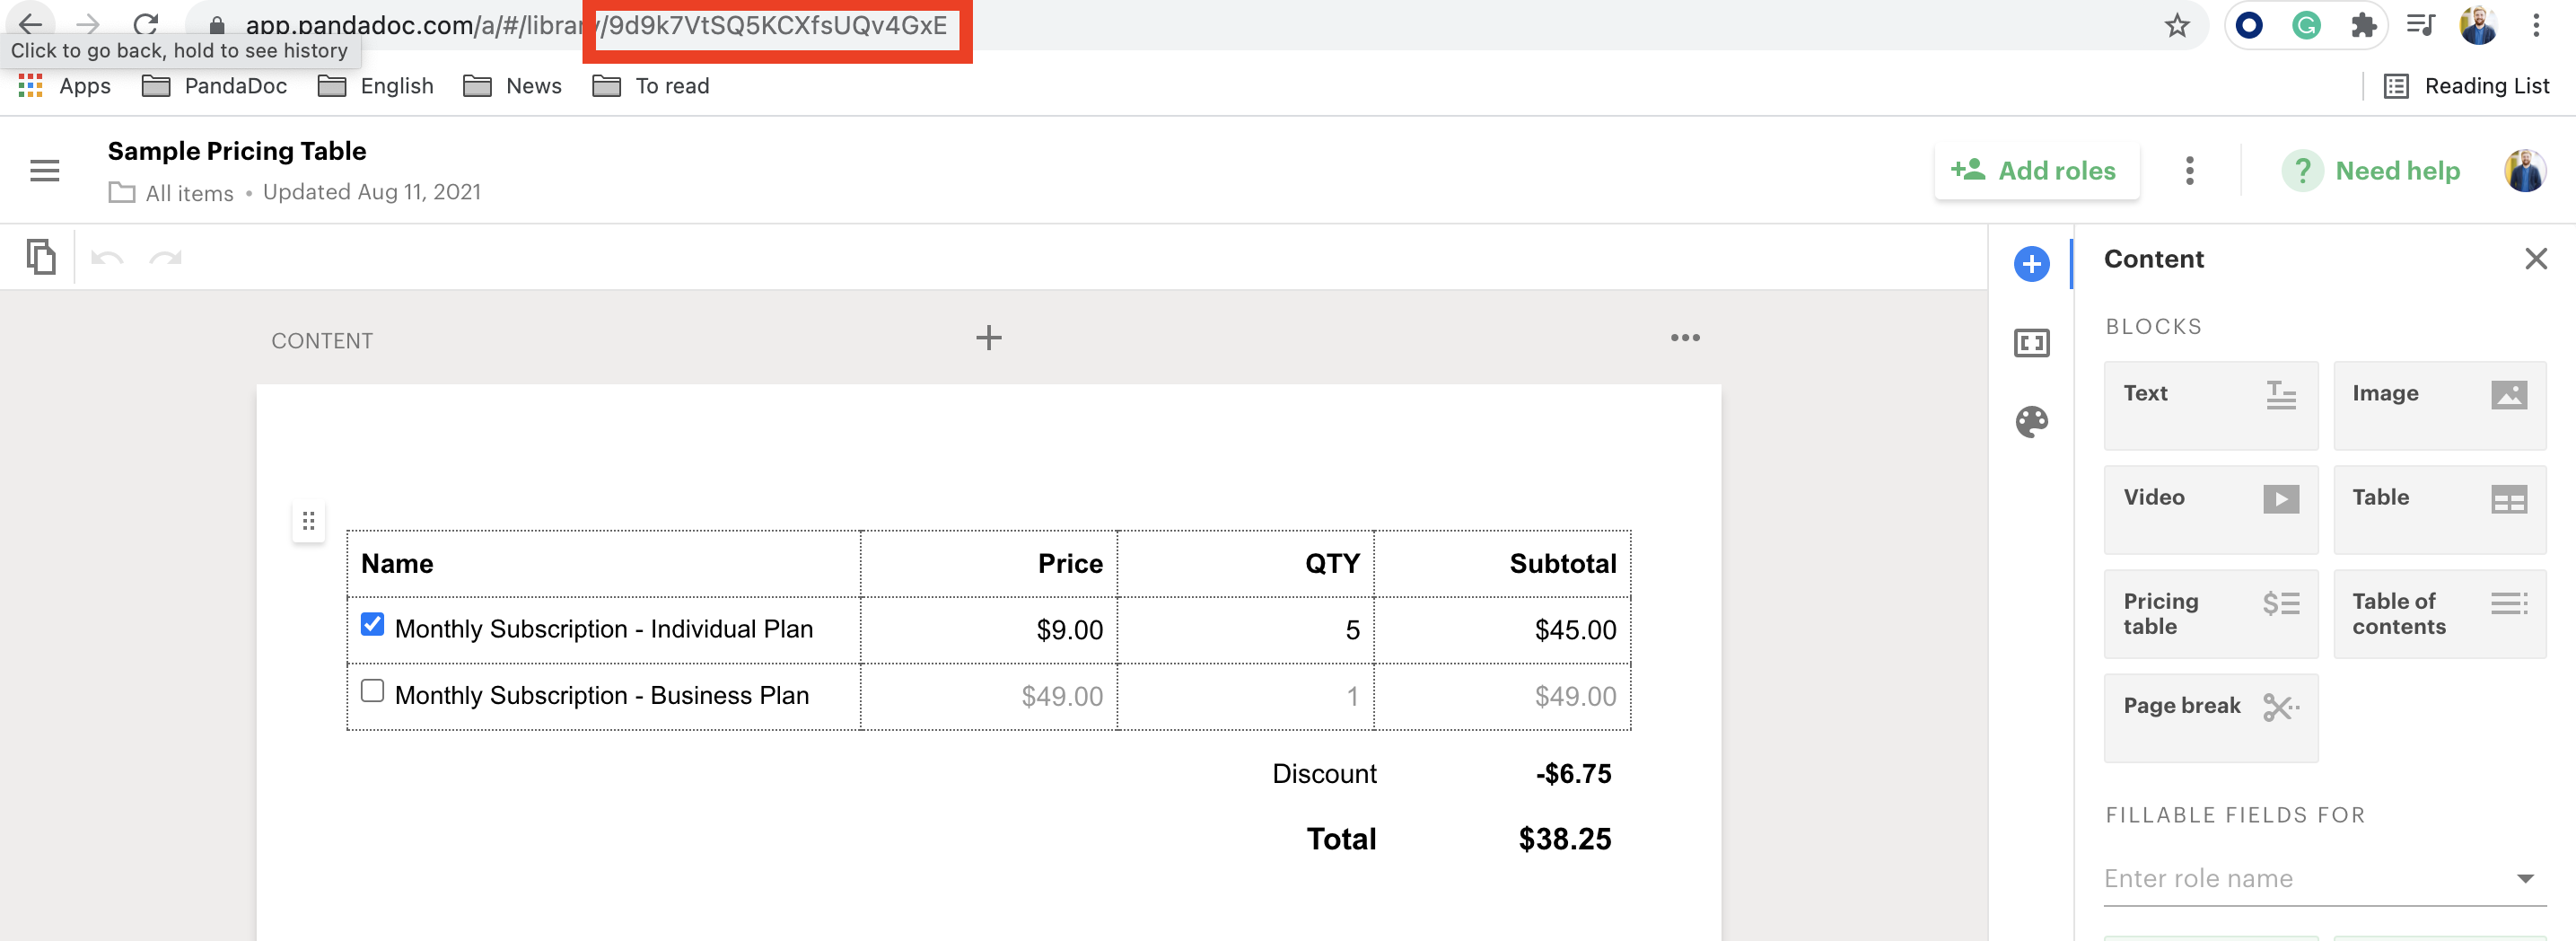 Sample Pricing Table -> Content Library Item ID